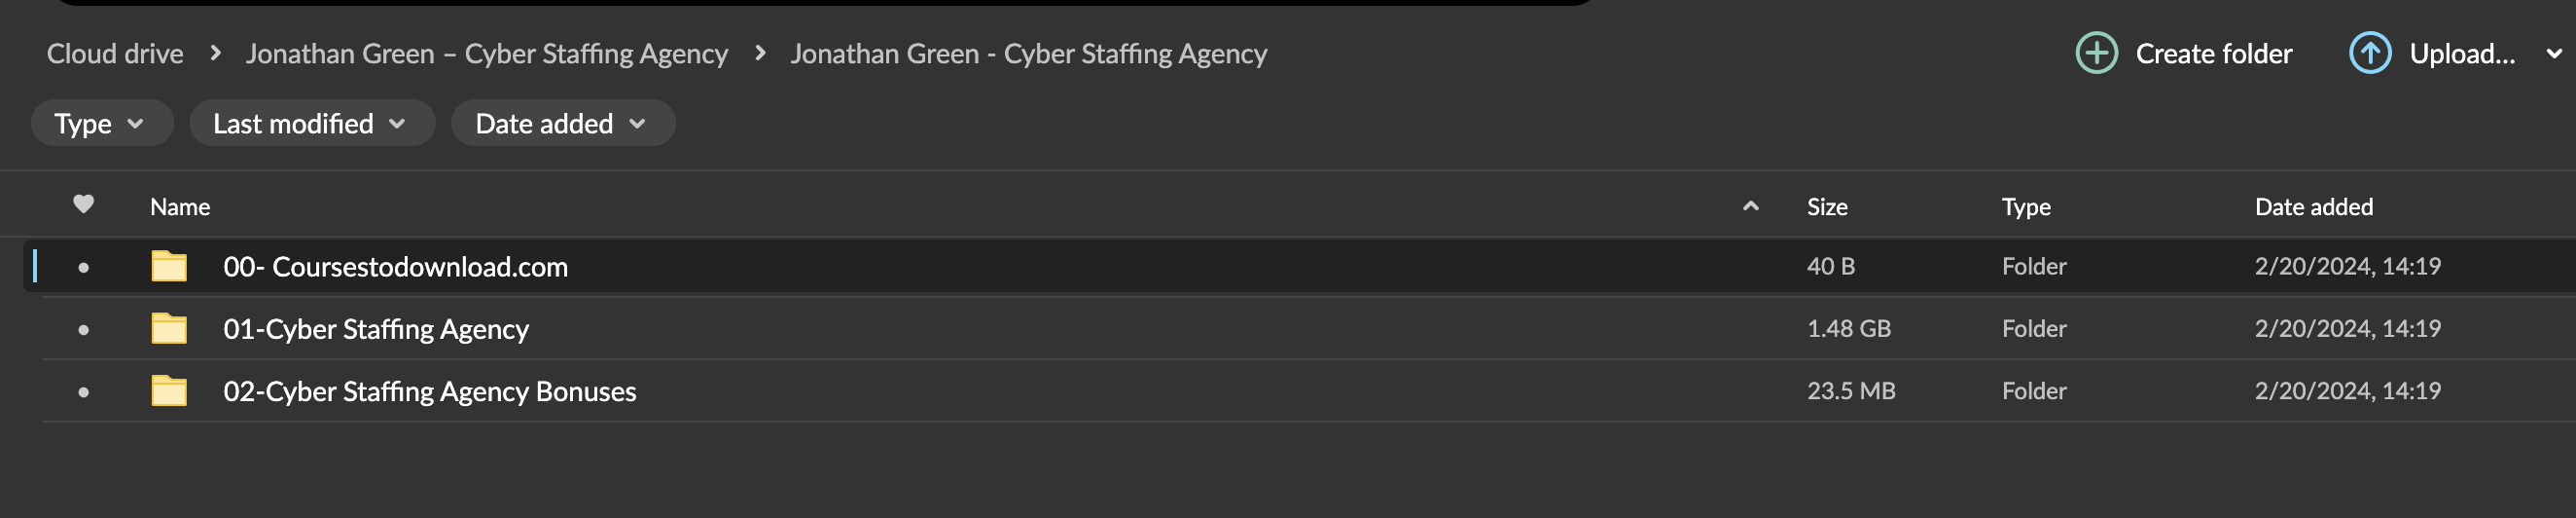 Jonathan Green – Cyber Staffing Agency Download